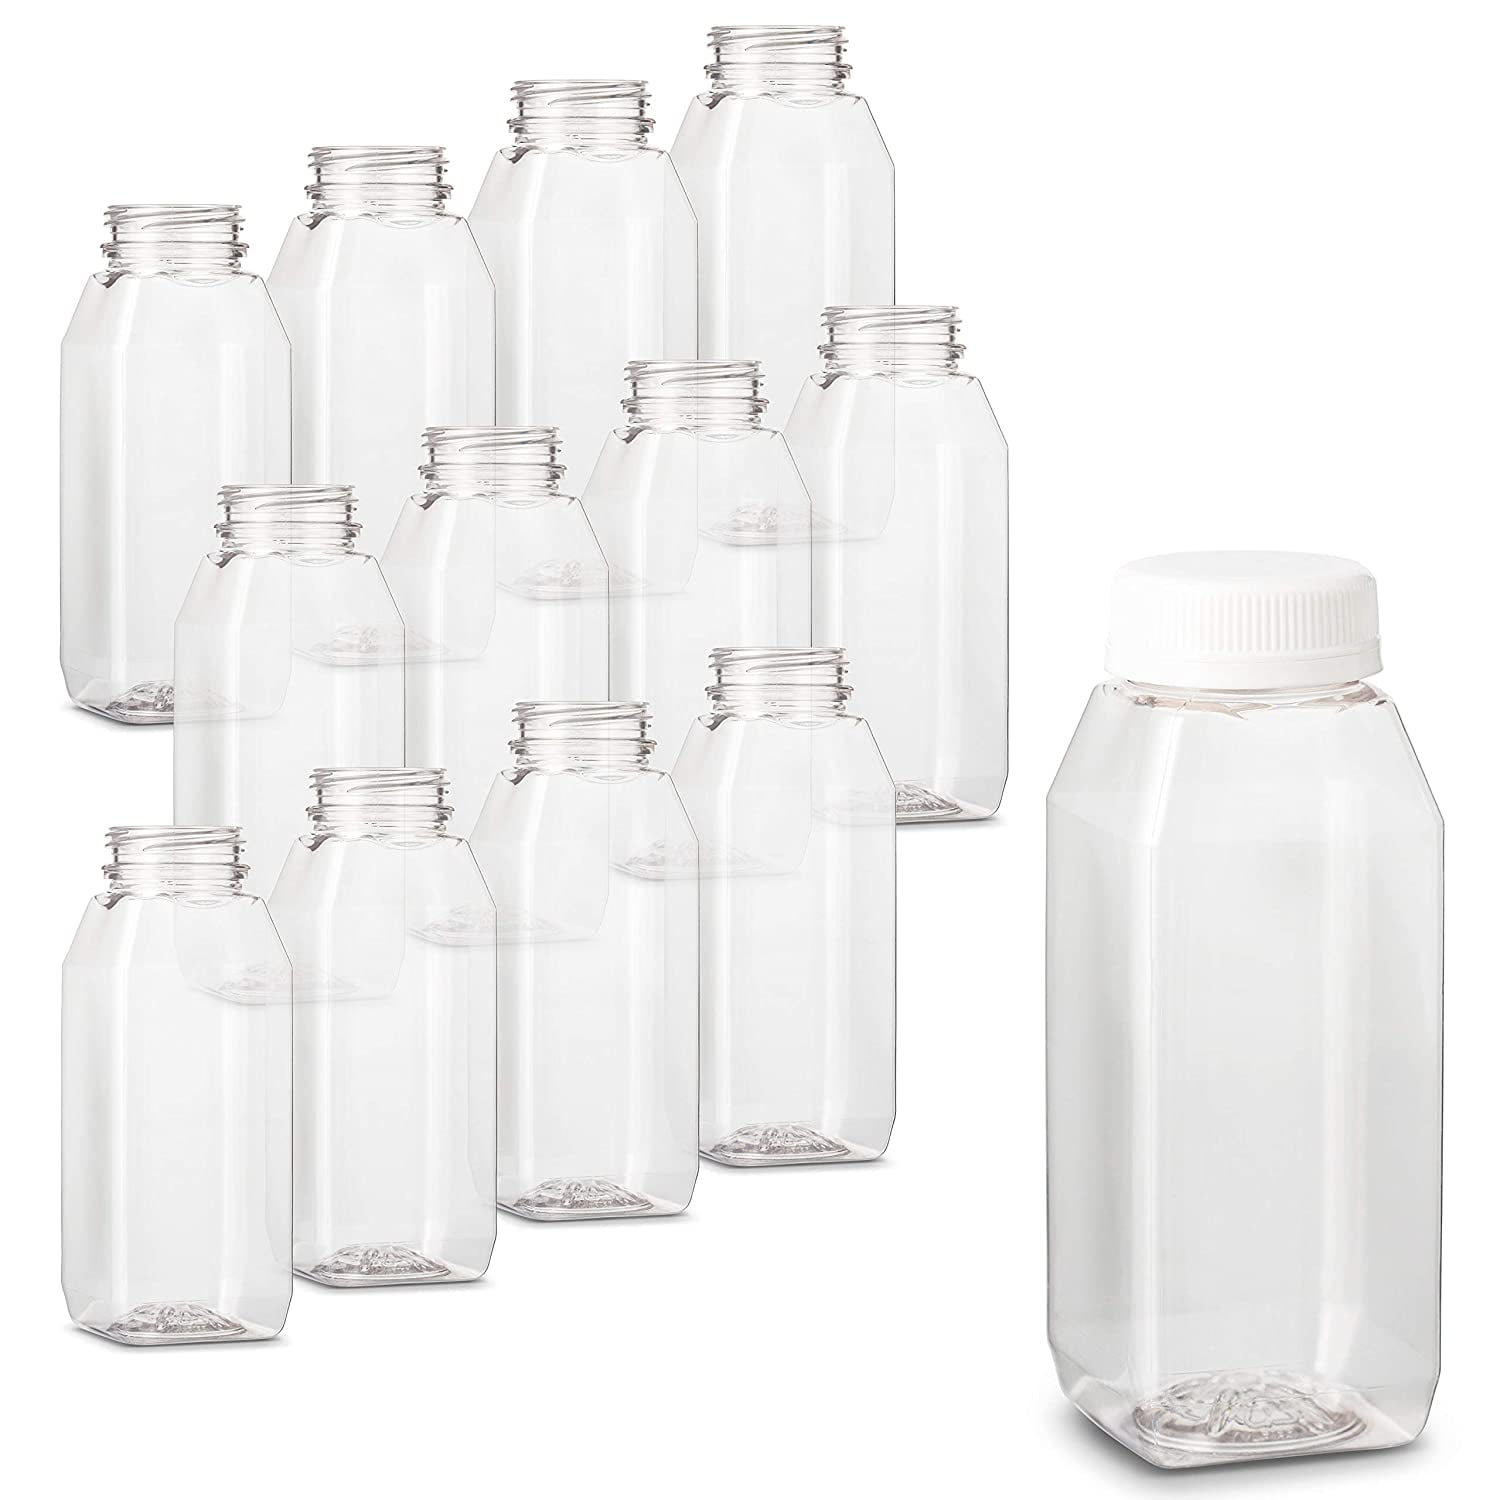 G Francis Plastic Juice Bottles with Caps in Black - 48pk 12oz Bottles with Lids, Size: 12 Ounce, Black|Clear